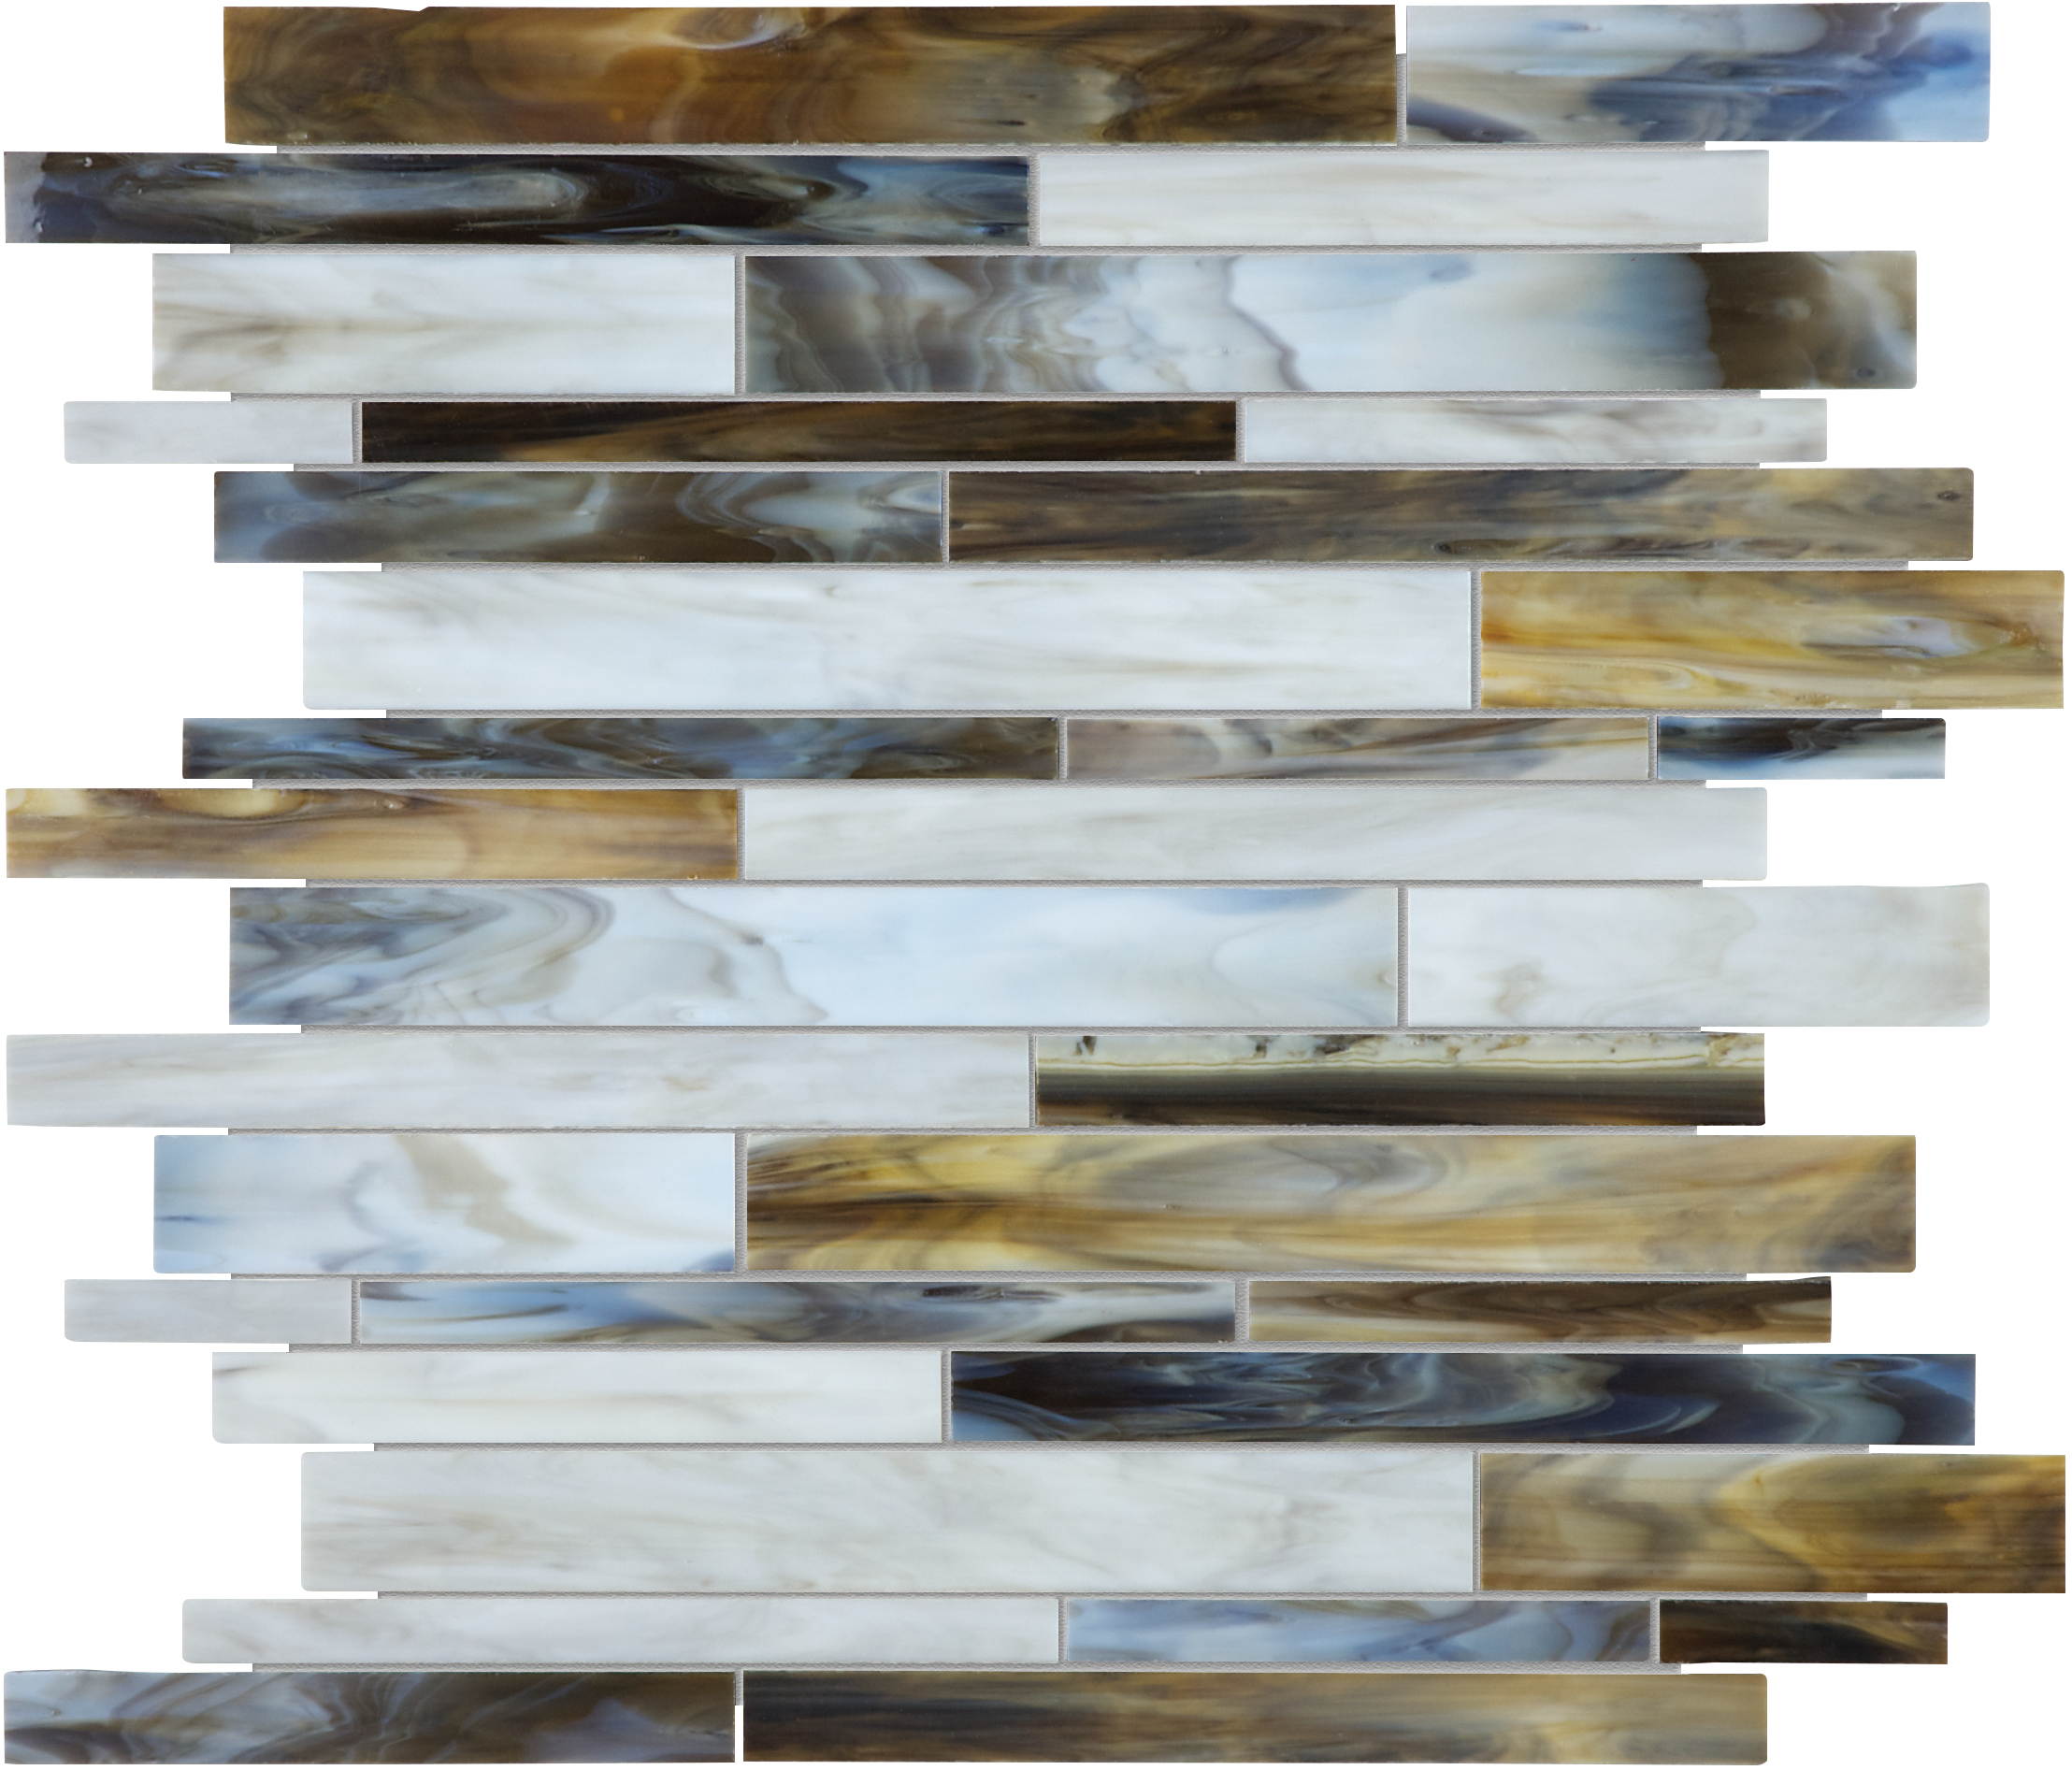 corallo random strip pattern fused glass mosaic from baroque anatolia collection distributed by surface group international glossy finish rounded edge mesh shape